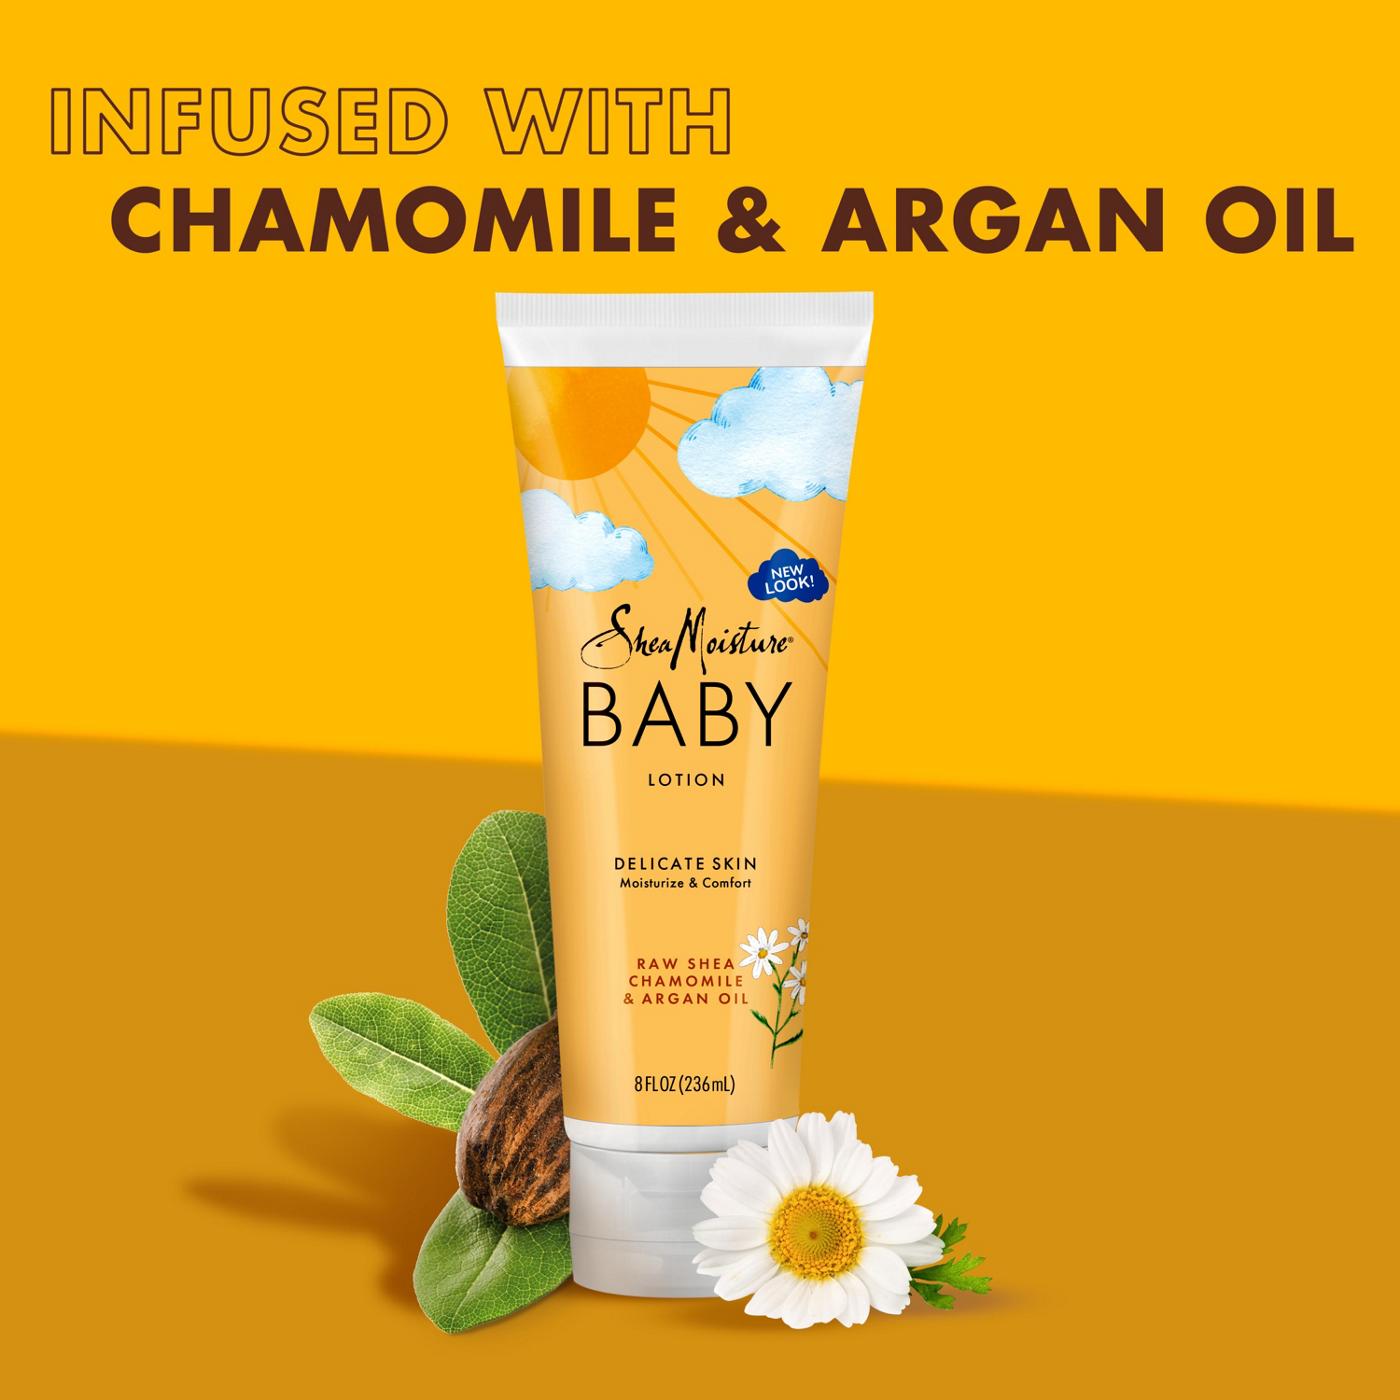 SheaMoisture Baby Lotion - Raw Shea Chamomile and Argan Oil; image 4 of 9